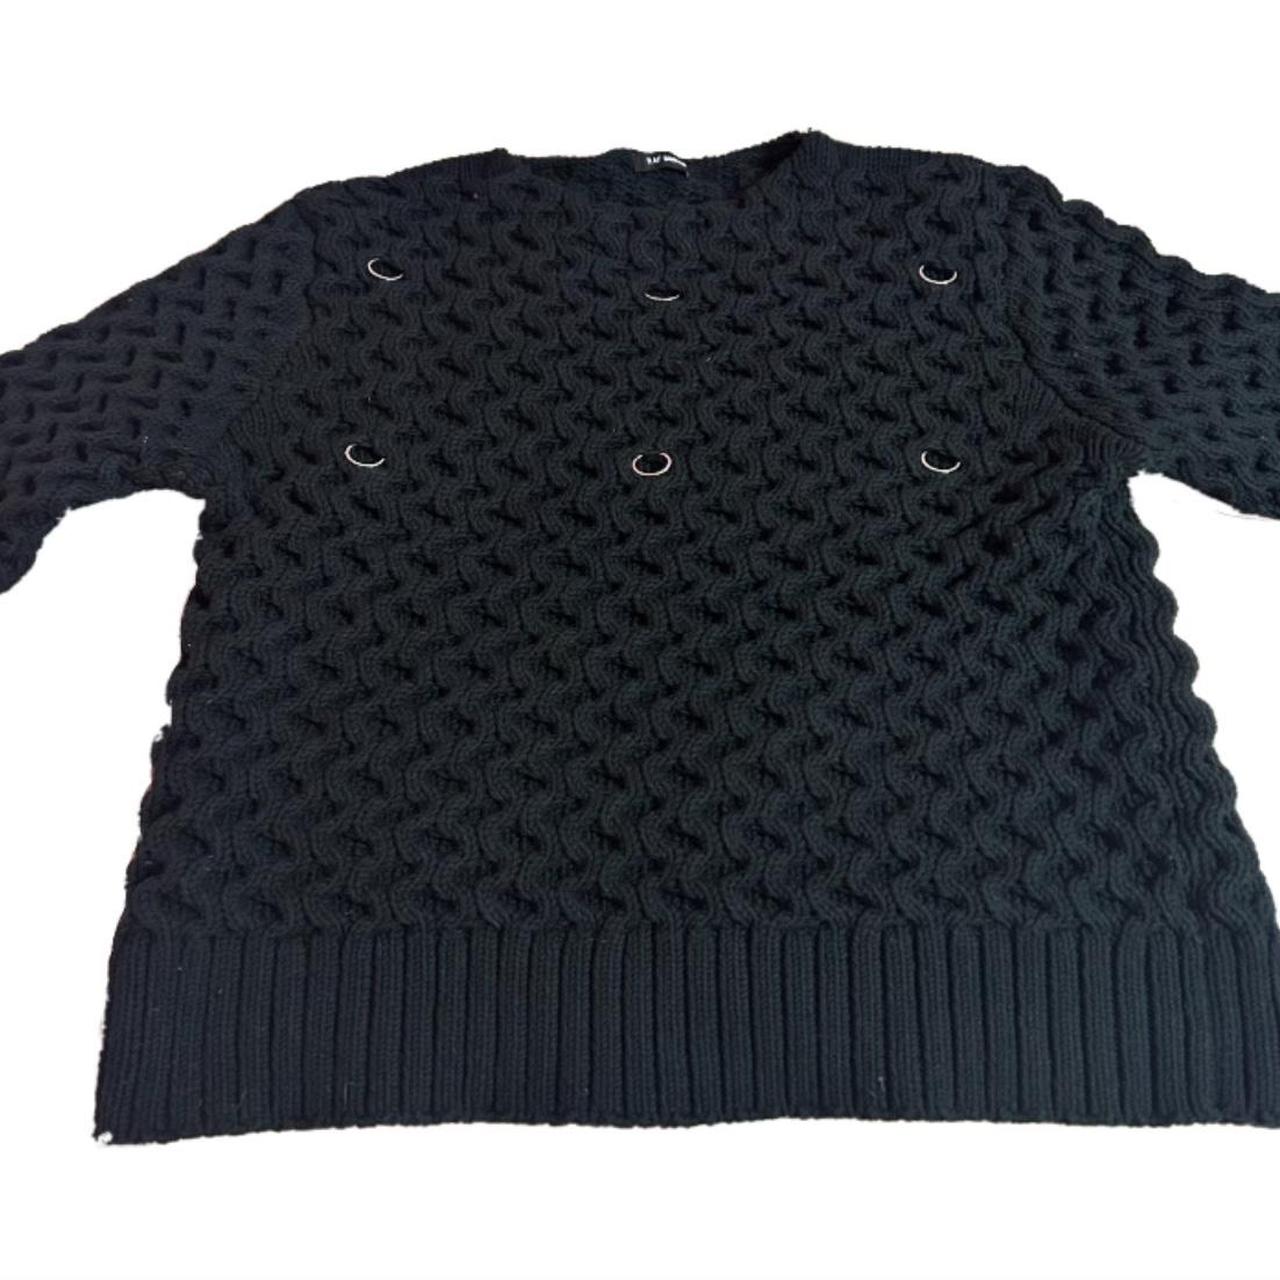 Raf Simons Black Wool Piercing Honey Stitch Sweater, Archive Collections